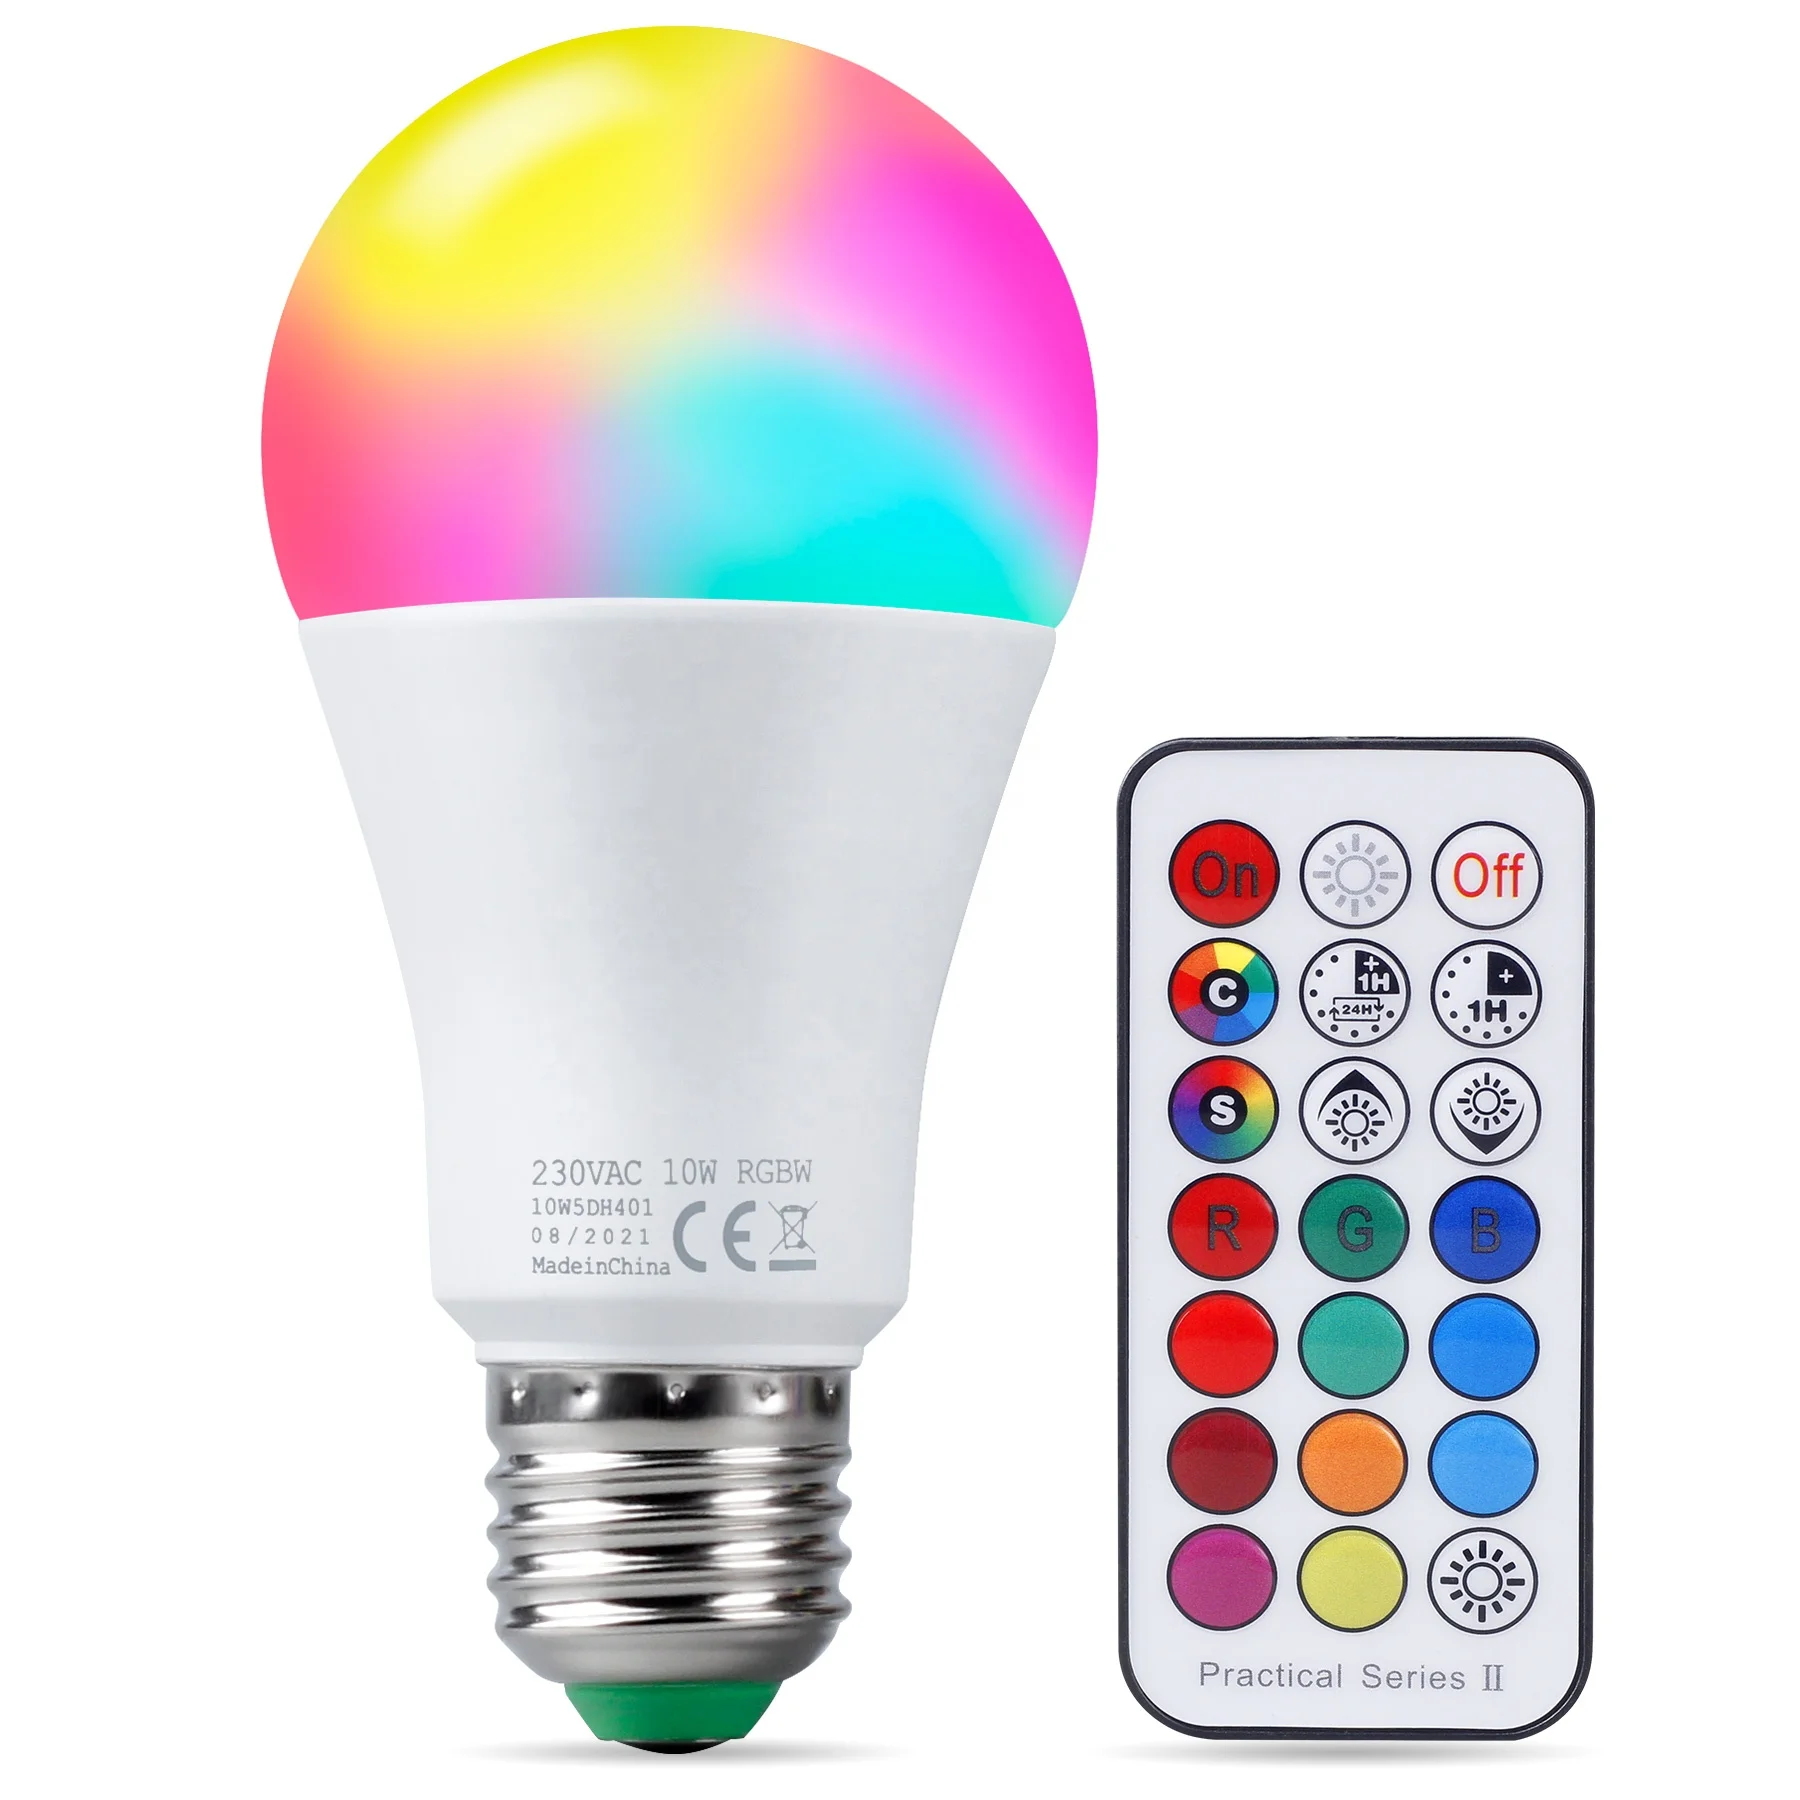 

E27 B22 10W Dimmable RGBW Mood Lighting 21key Remote Control Dual Memory Function 12 Color Changing LED Light Bulbs for Home Dec